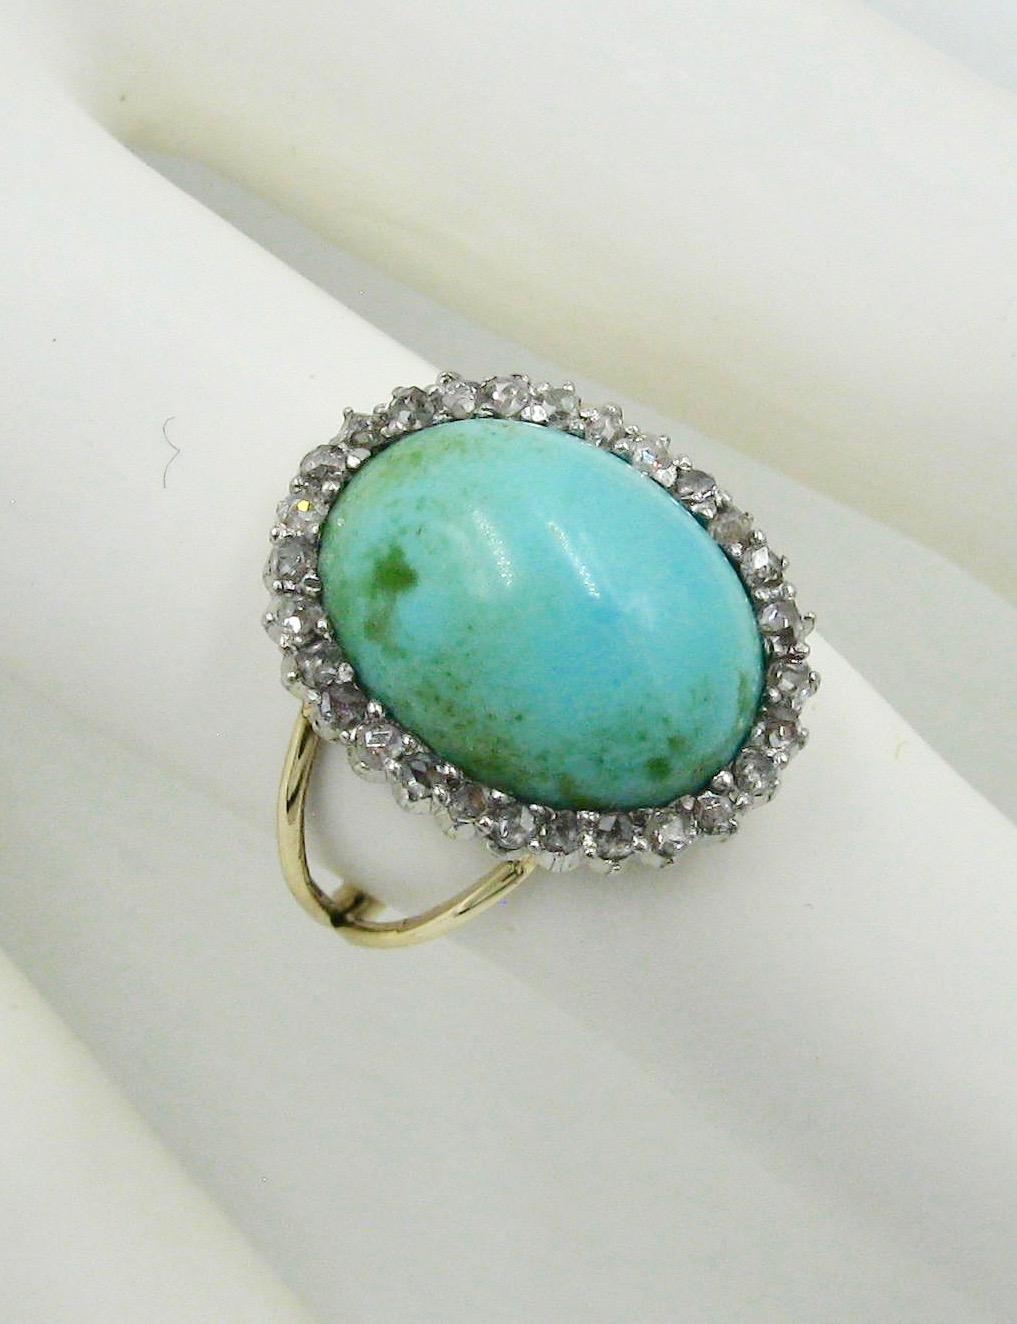 An Antique Edwardian Ring with a gorgeous Persian Turquoise cabochon of stunning beauty. The Turquoise is surrounded by a halo of 30 sparkling Rose Cut Diamonds. The jewels are set in Platinum atop 14 Karat Gold. One of my favorite rings! The